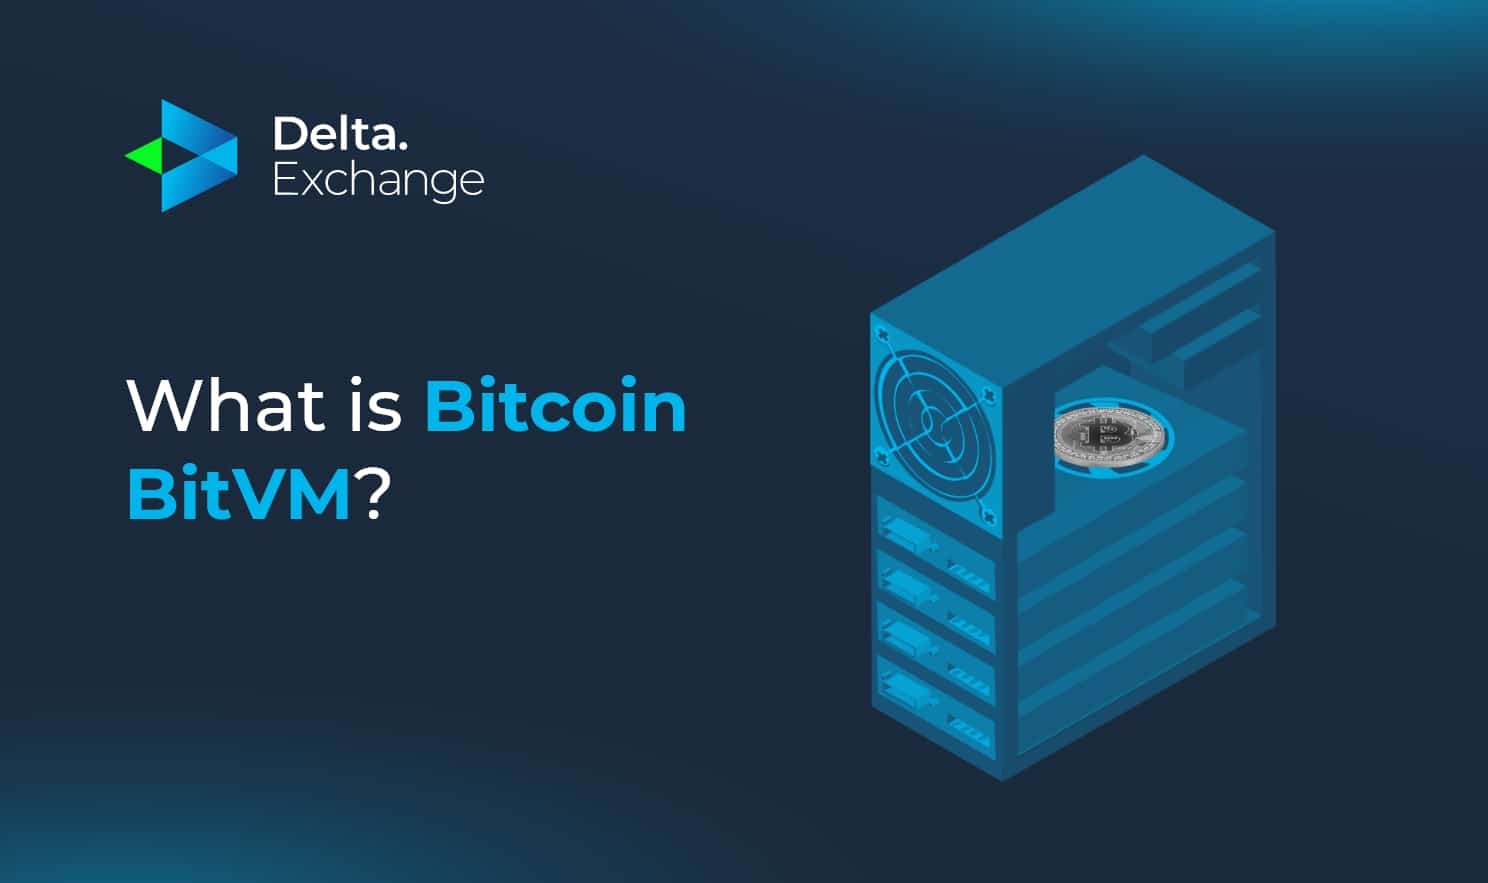 What is BitVM?